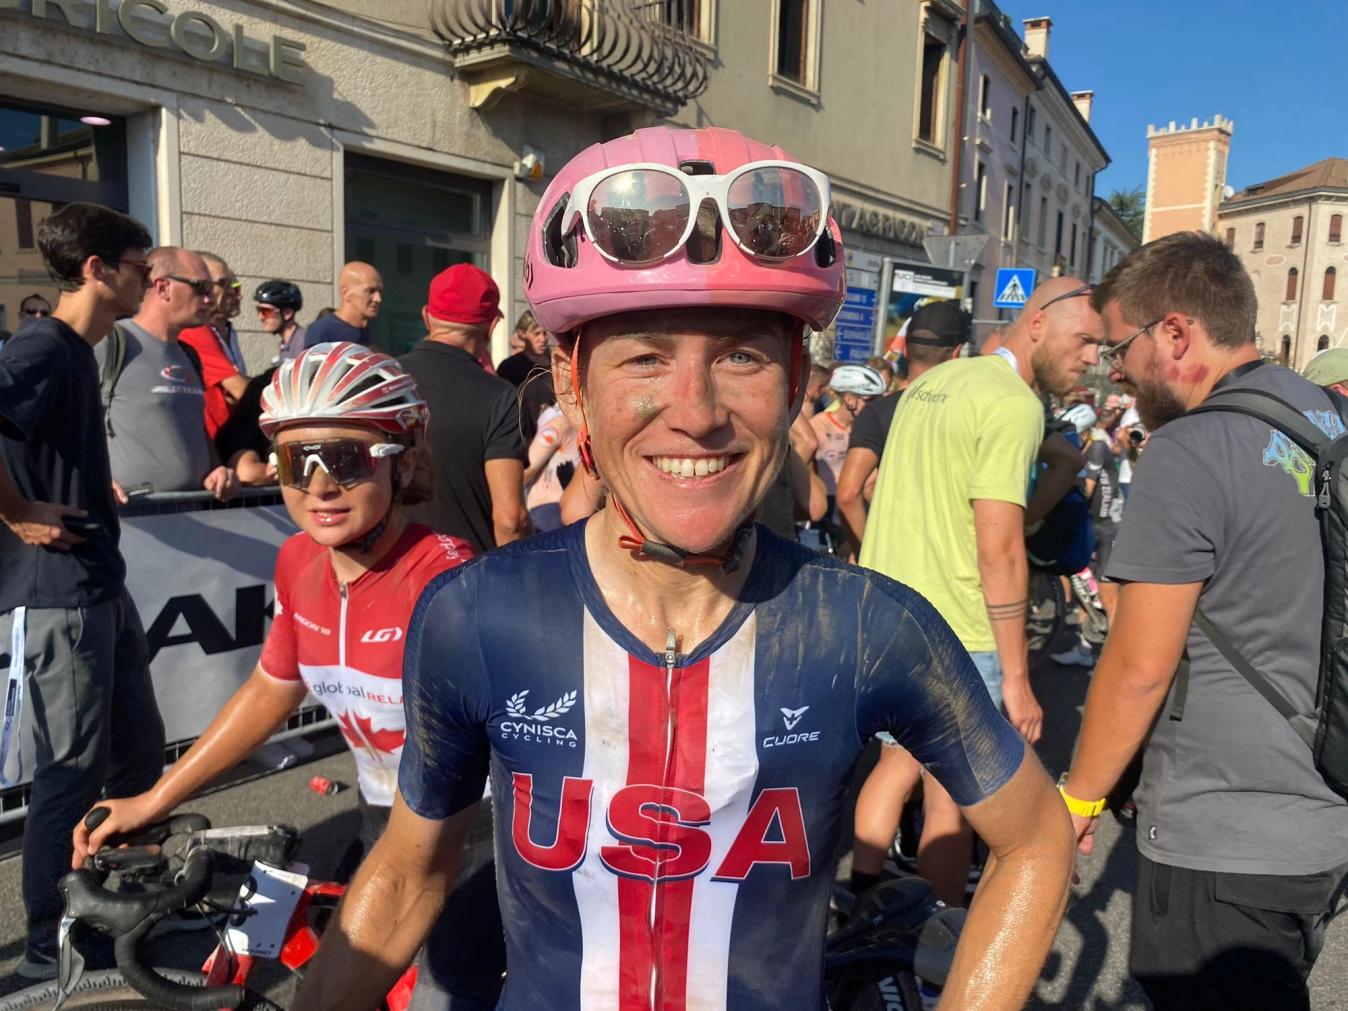 Lauren Stephens (United States) after finishing sixth at Gravel Worlds